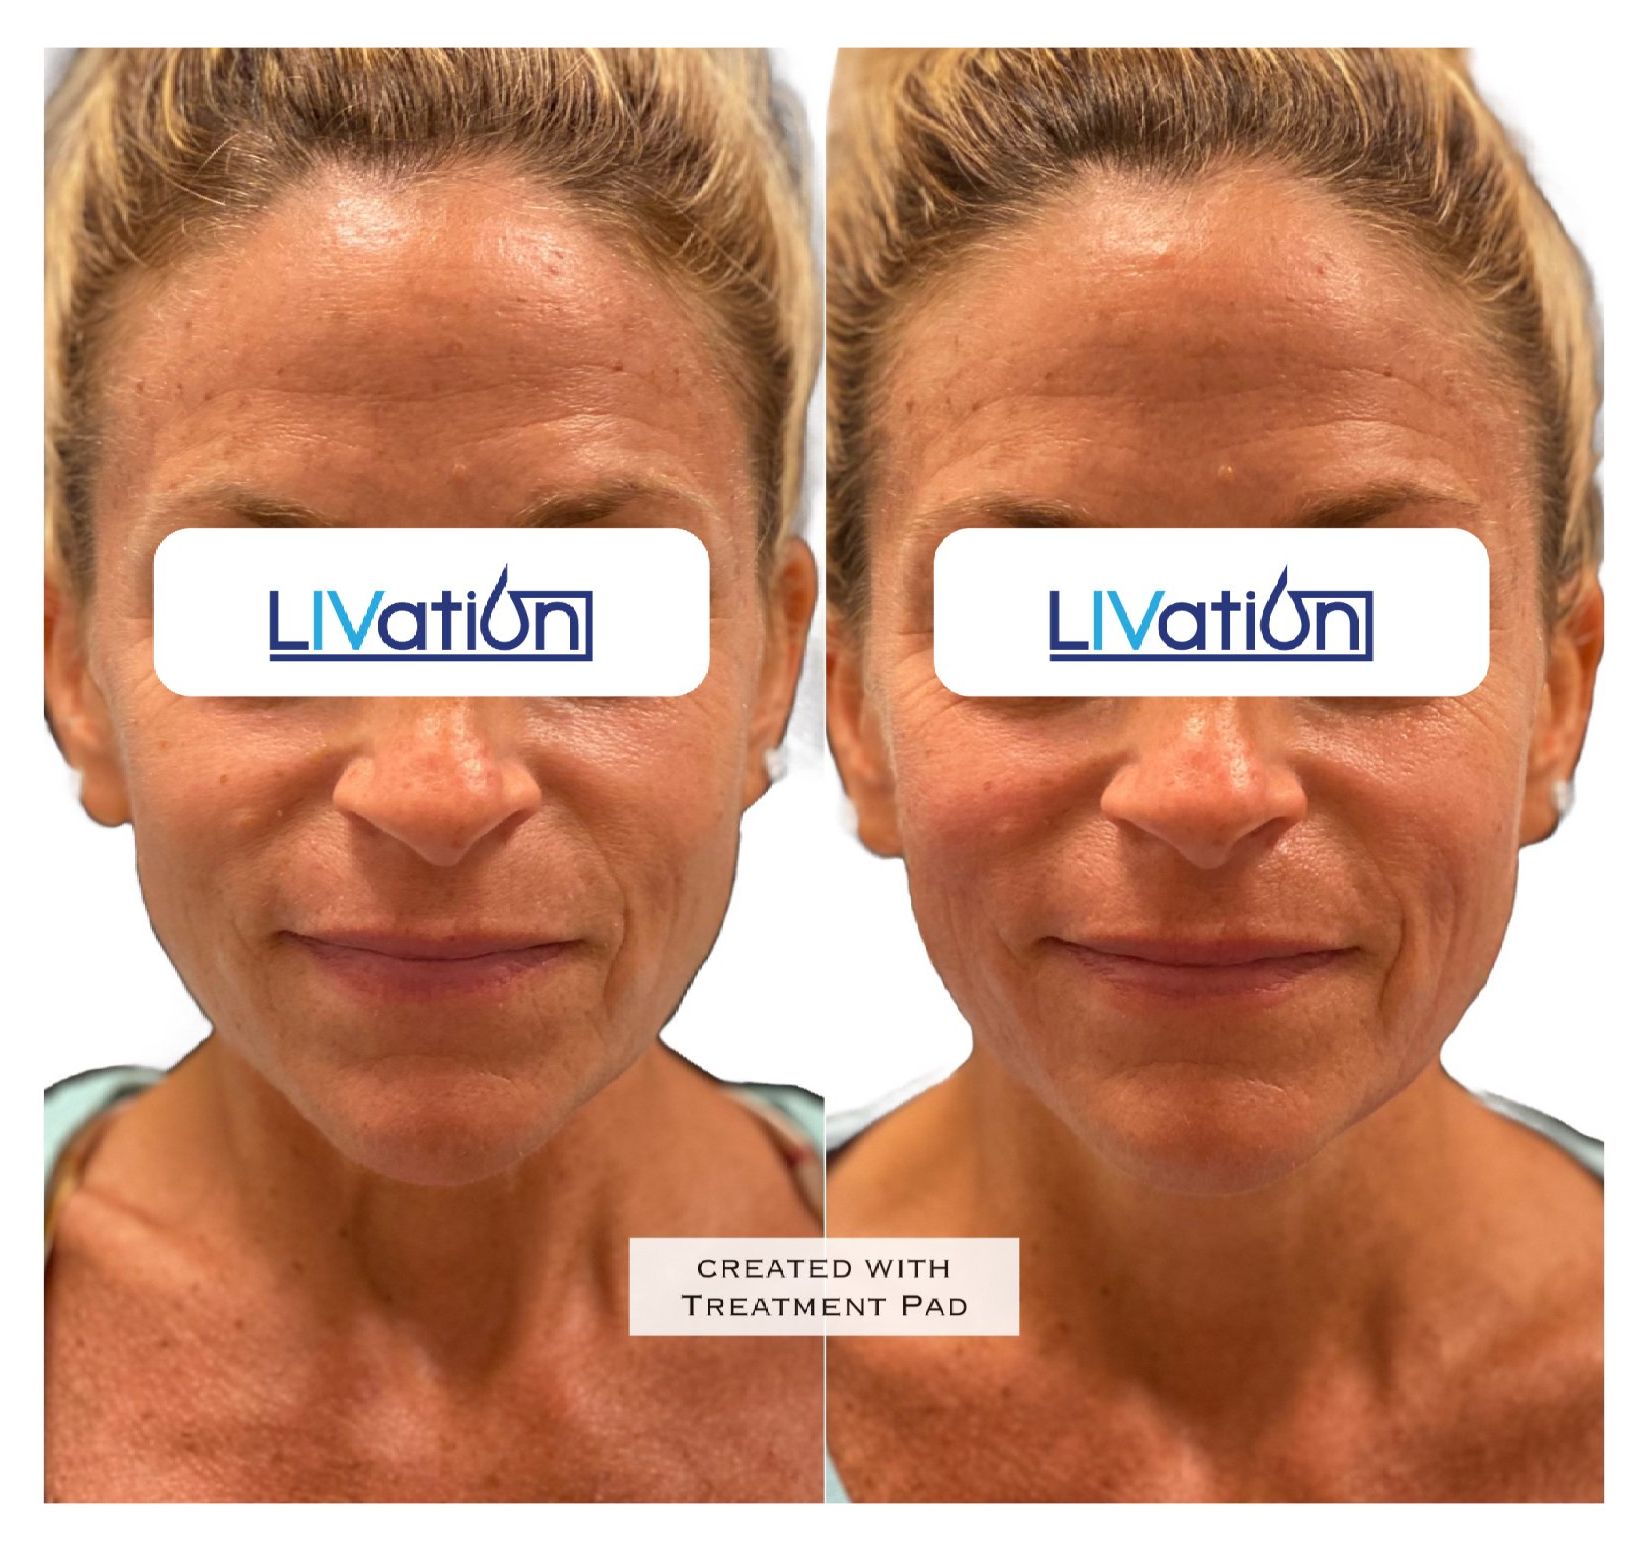 triLift Facelift Before & After